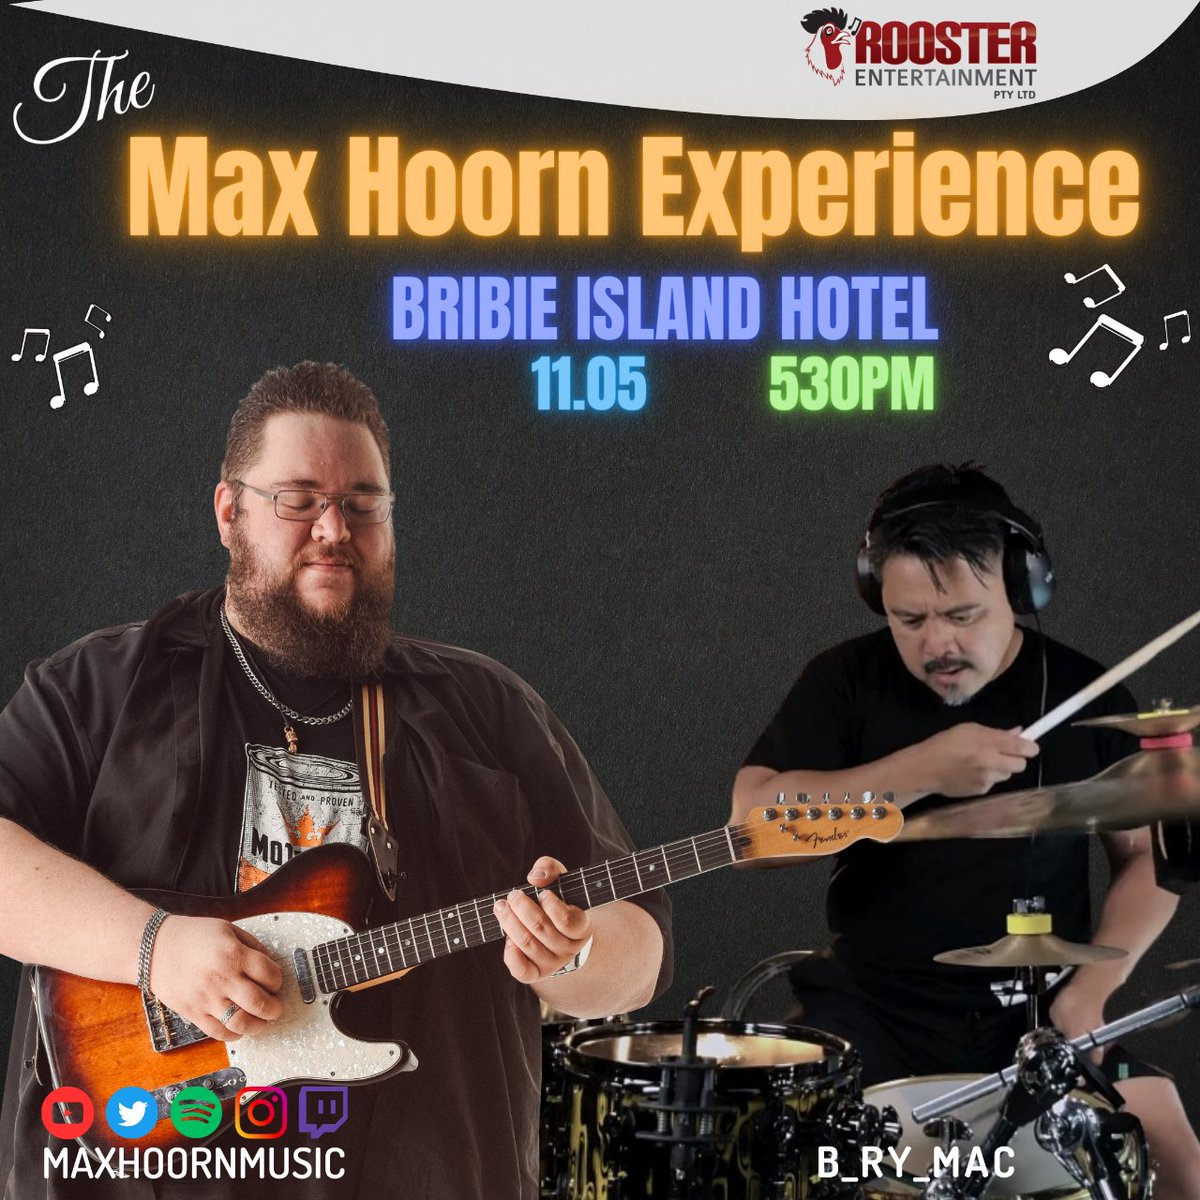 Playing at the Bribie Island Hotel with Bryan Macaranas on the drums!

#livemusic #music #musiciansofinstagram #loopy #qscaudio #qldentertainment #guitaristsofinstagram #maxhoornexperience #vorndao #music4life #supportlivemusic #musicians #livelooping #thuglife #gigs #whatson